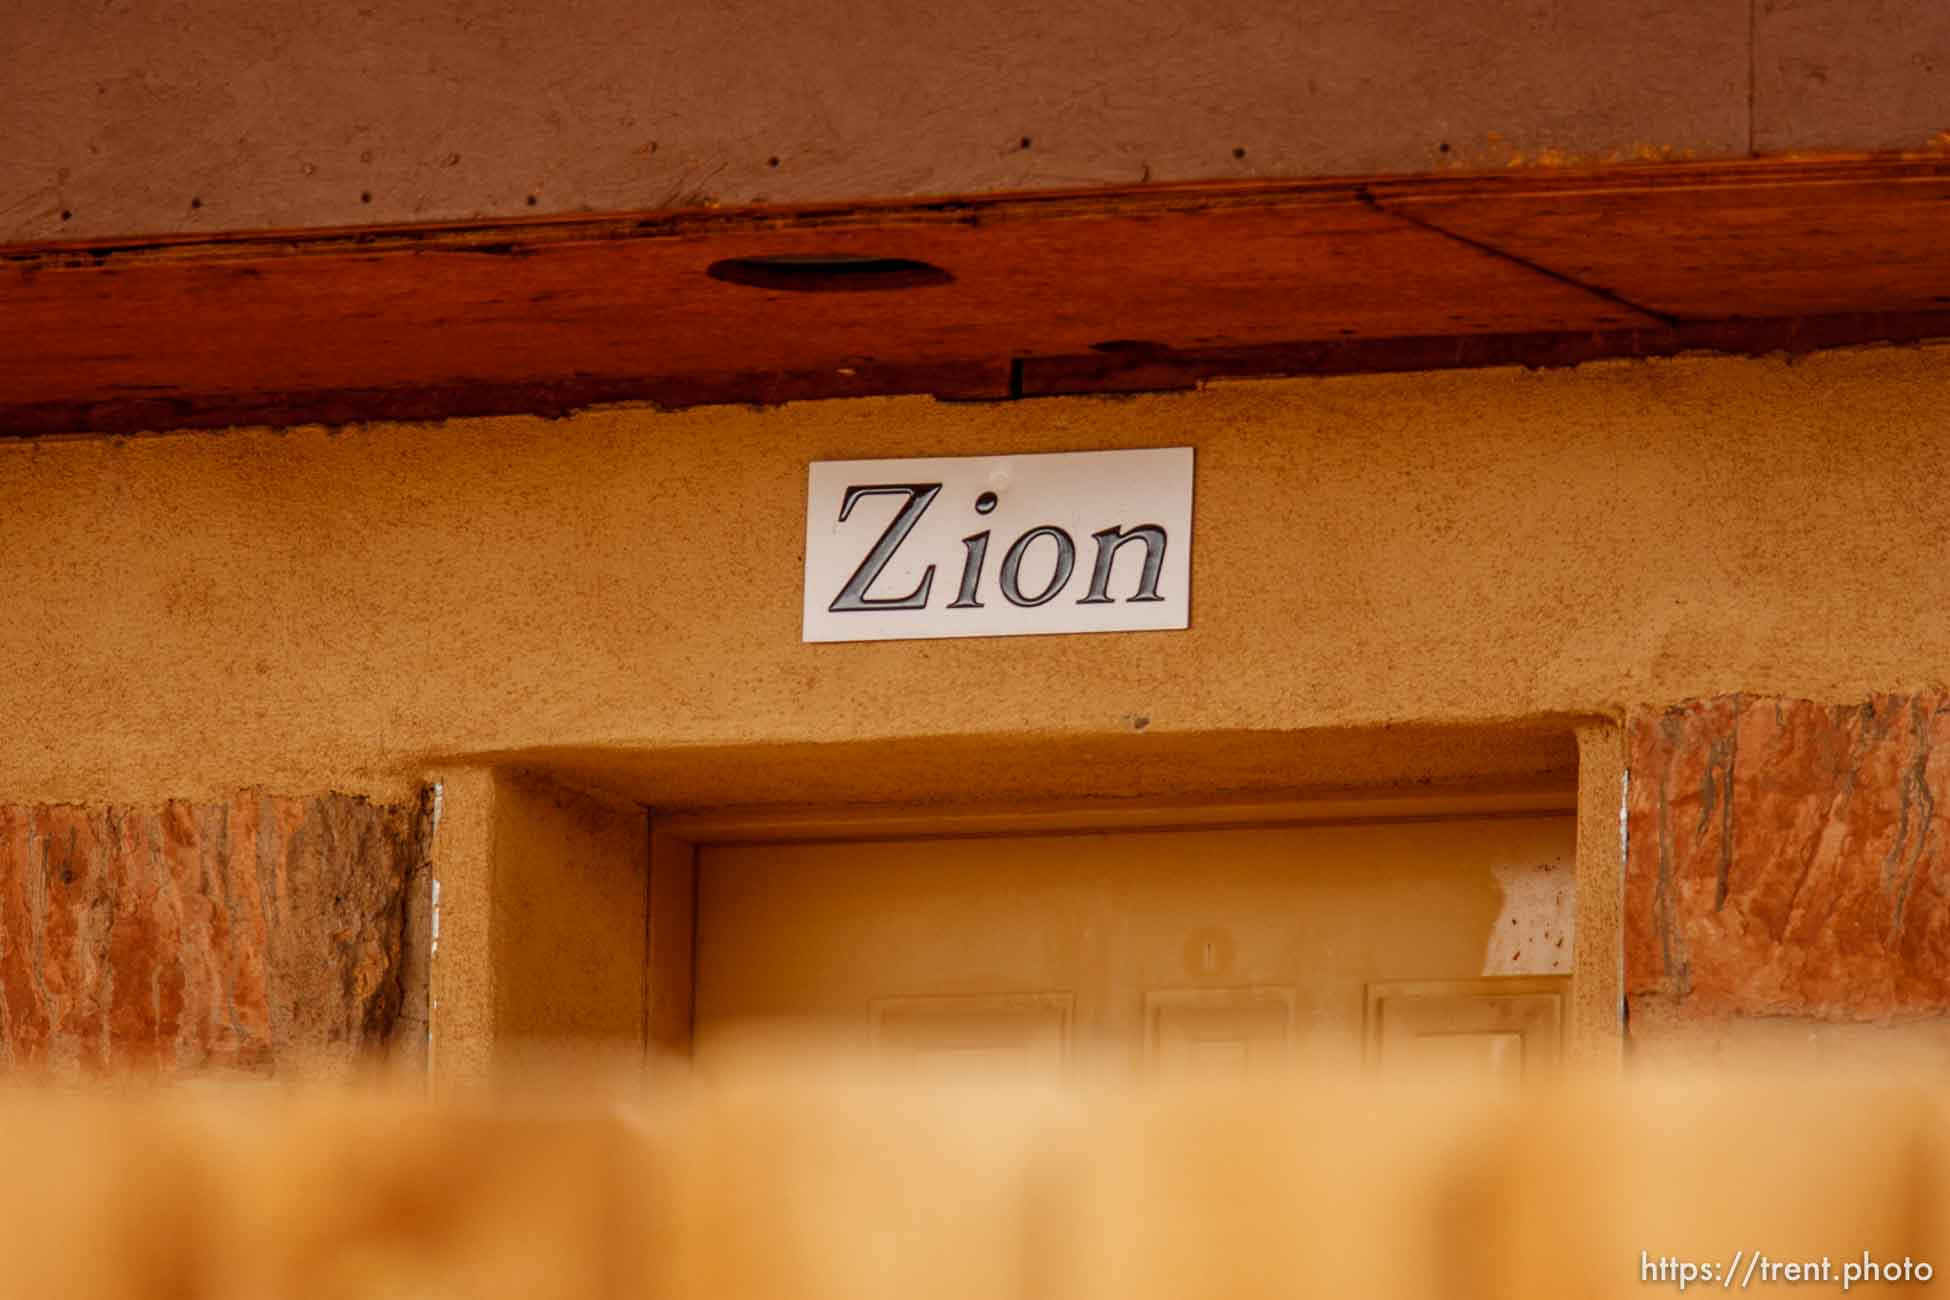 The Zion Collection